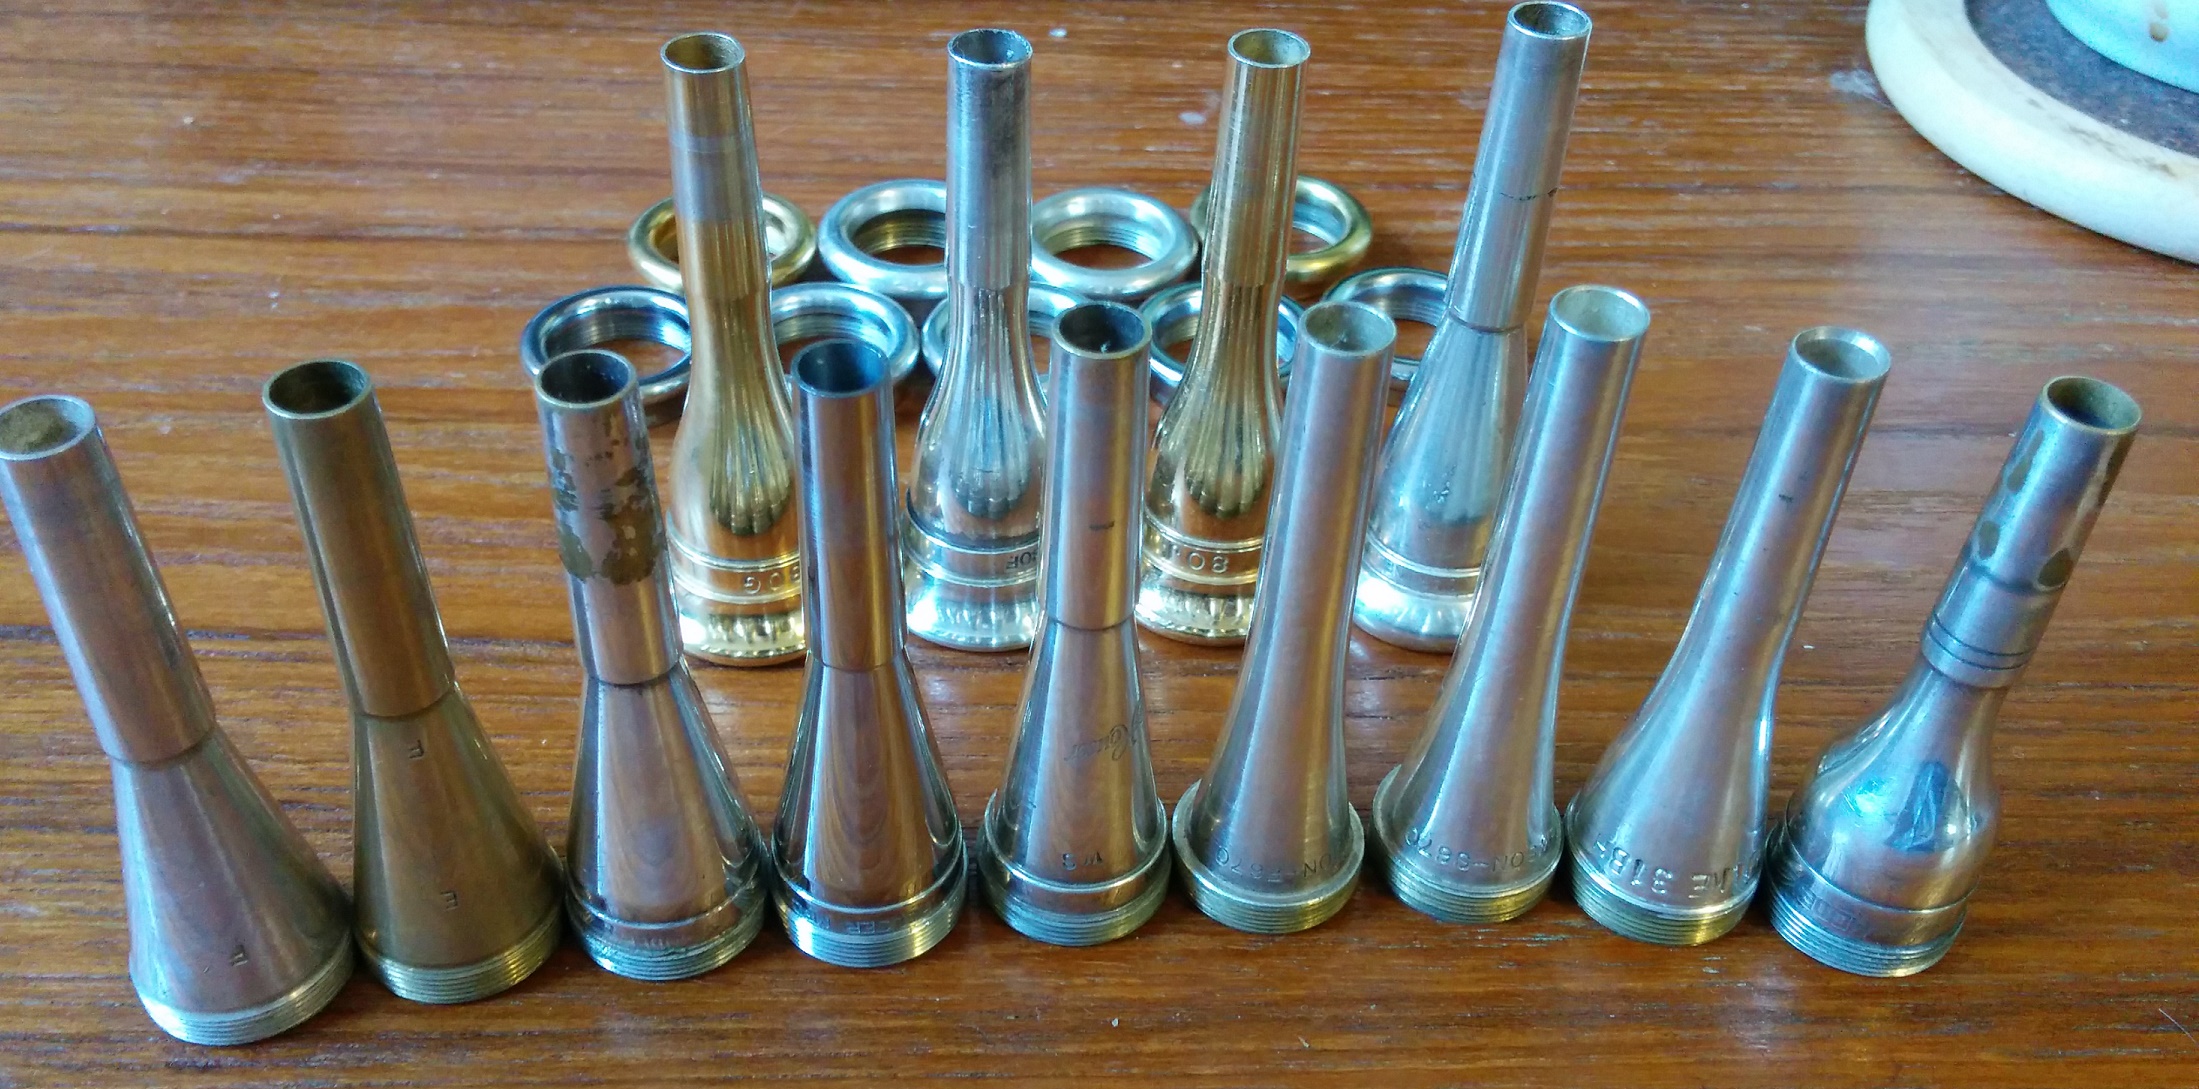 500+ French Horn Mouthpiece Models Compared!